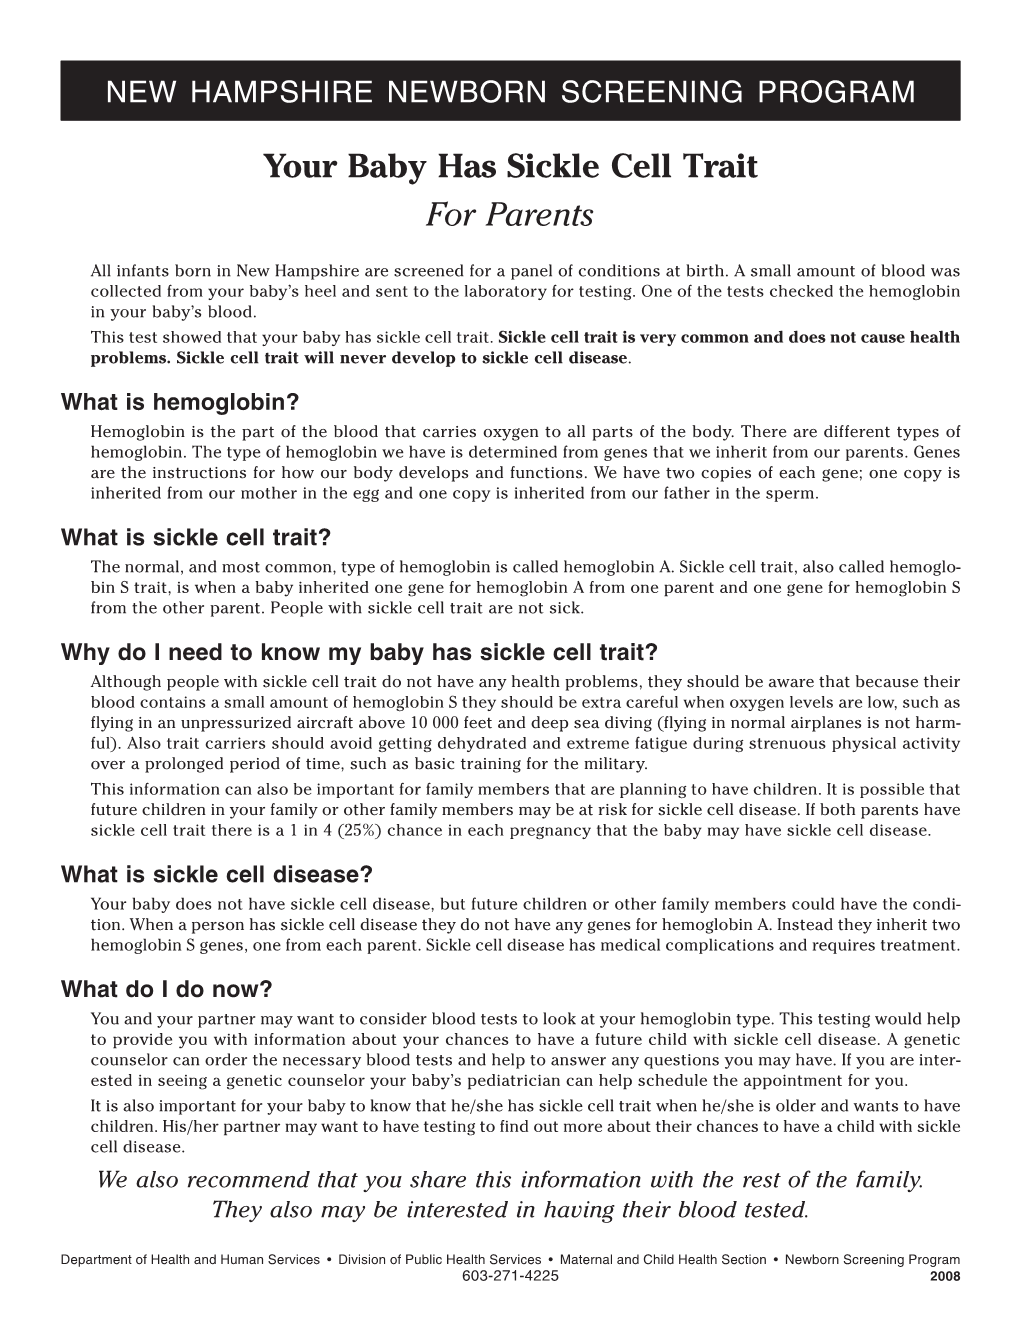 Your Baby Has Sickle Cell Trait for Parents